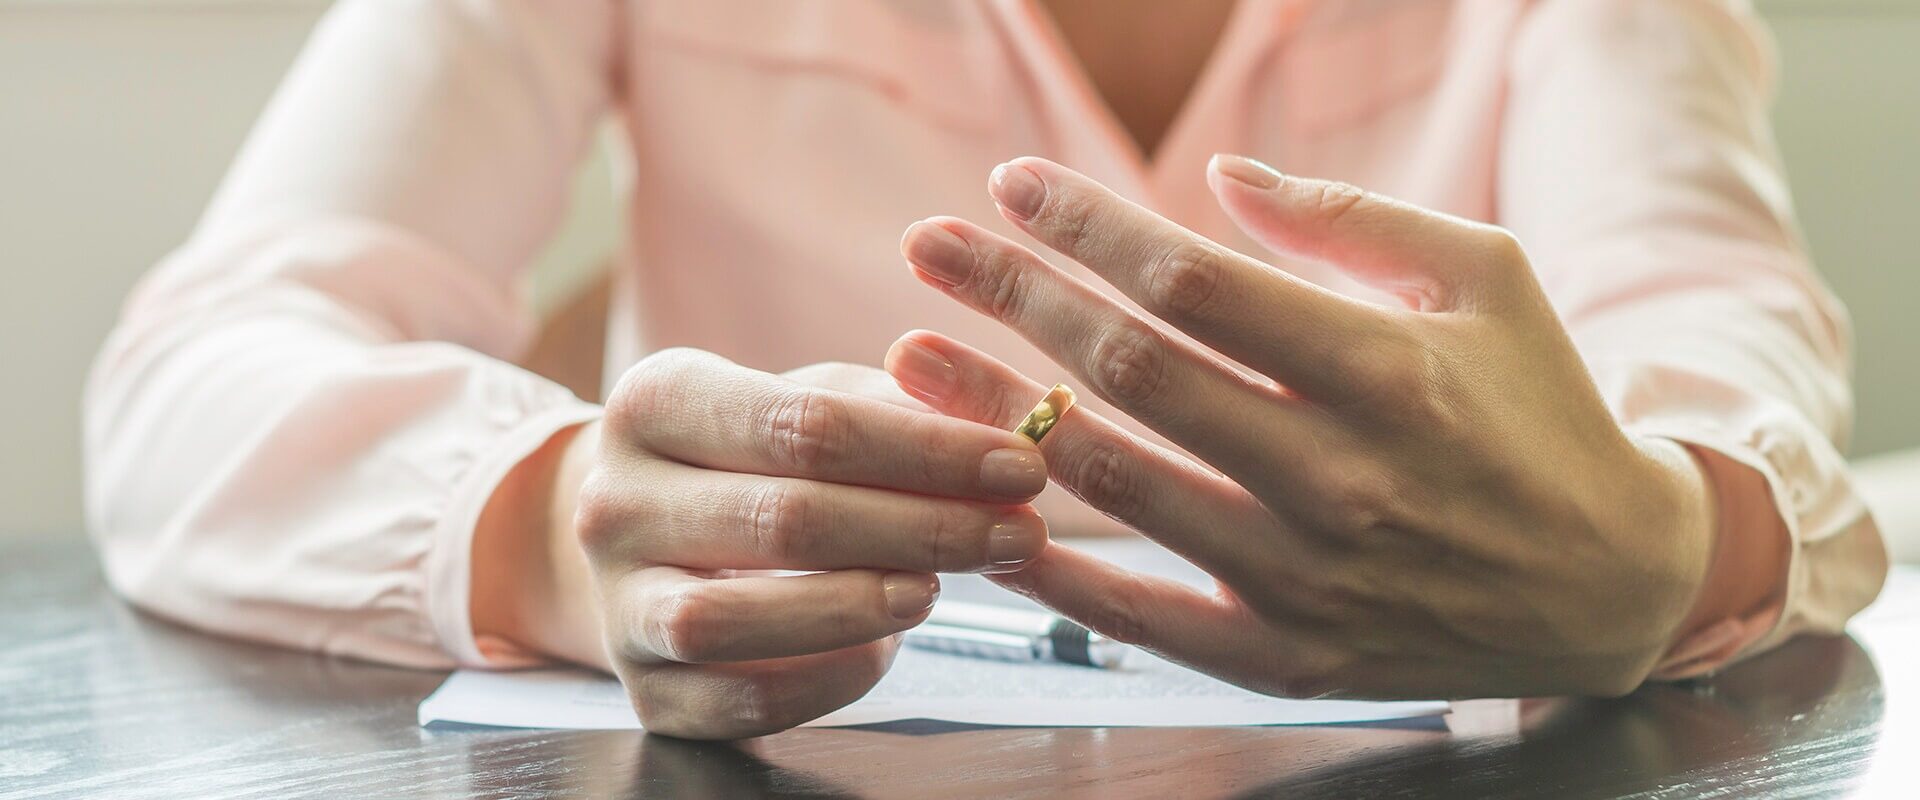 woman taking off wedding ring after divorce